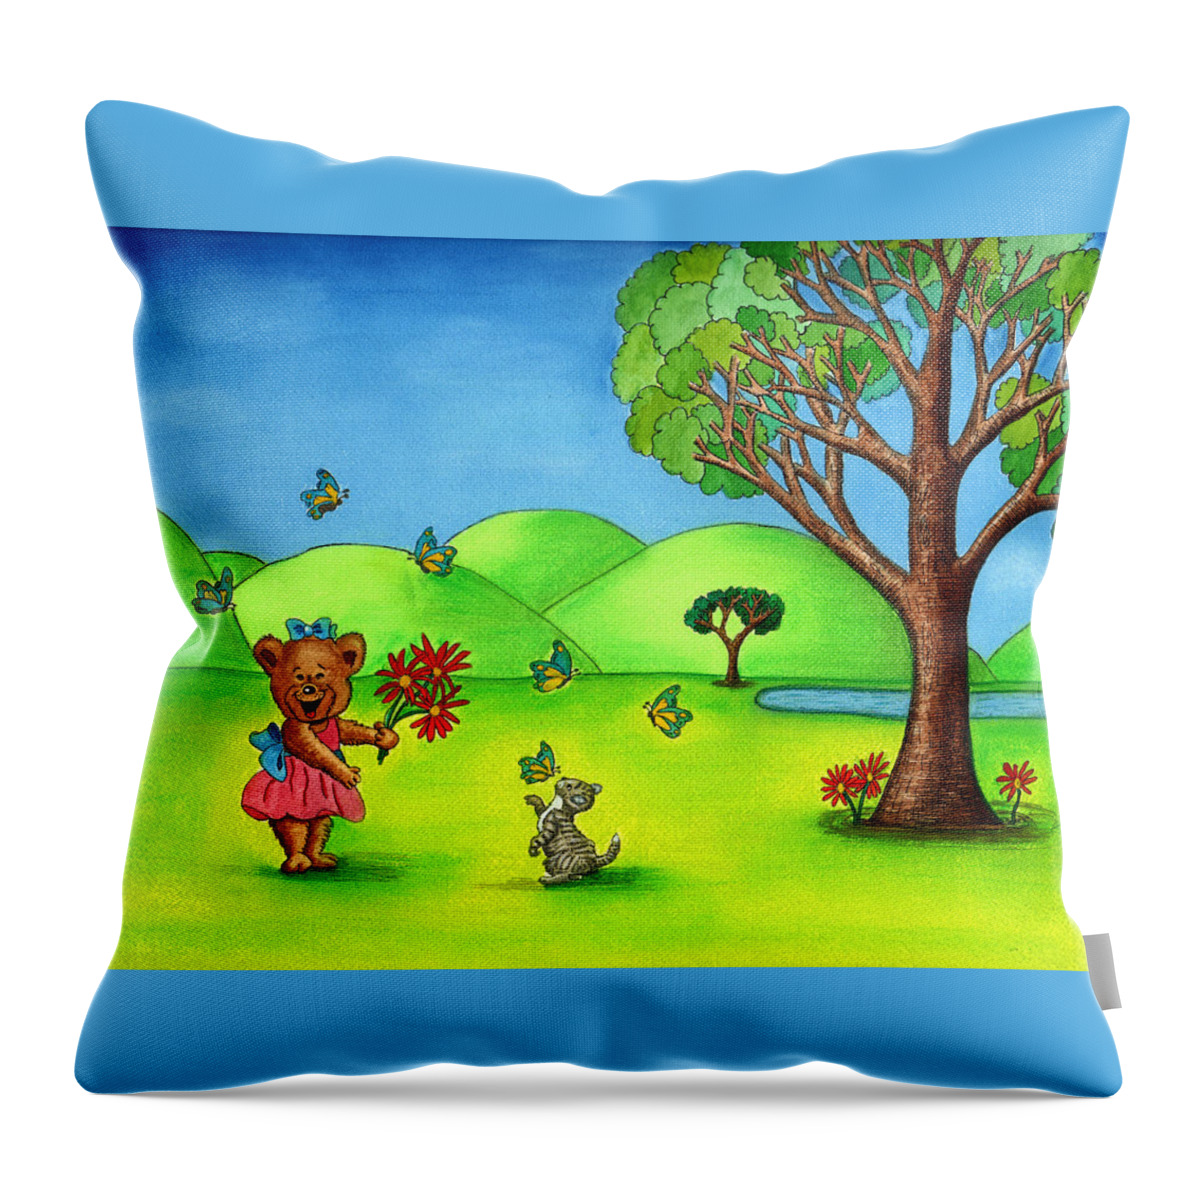 Butterflies Throw Pillow featuring the painting Butterfly Kisses by Christina Wedberg